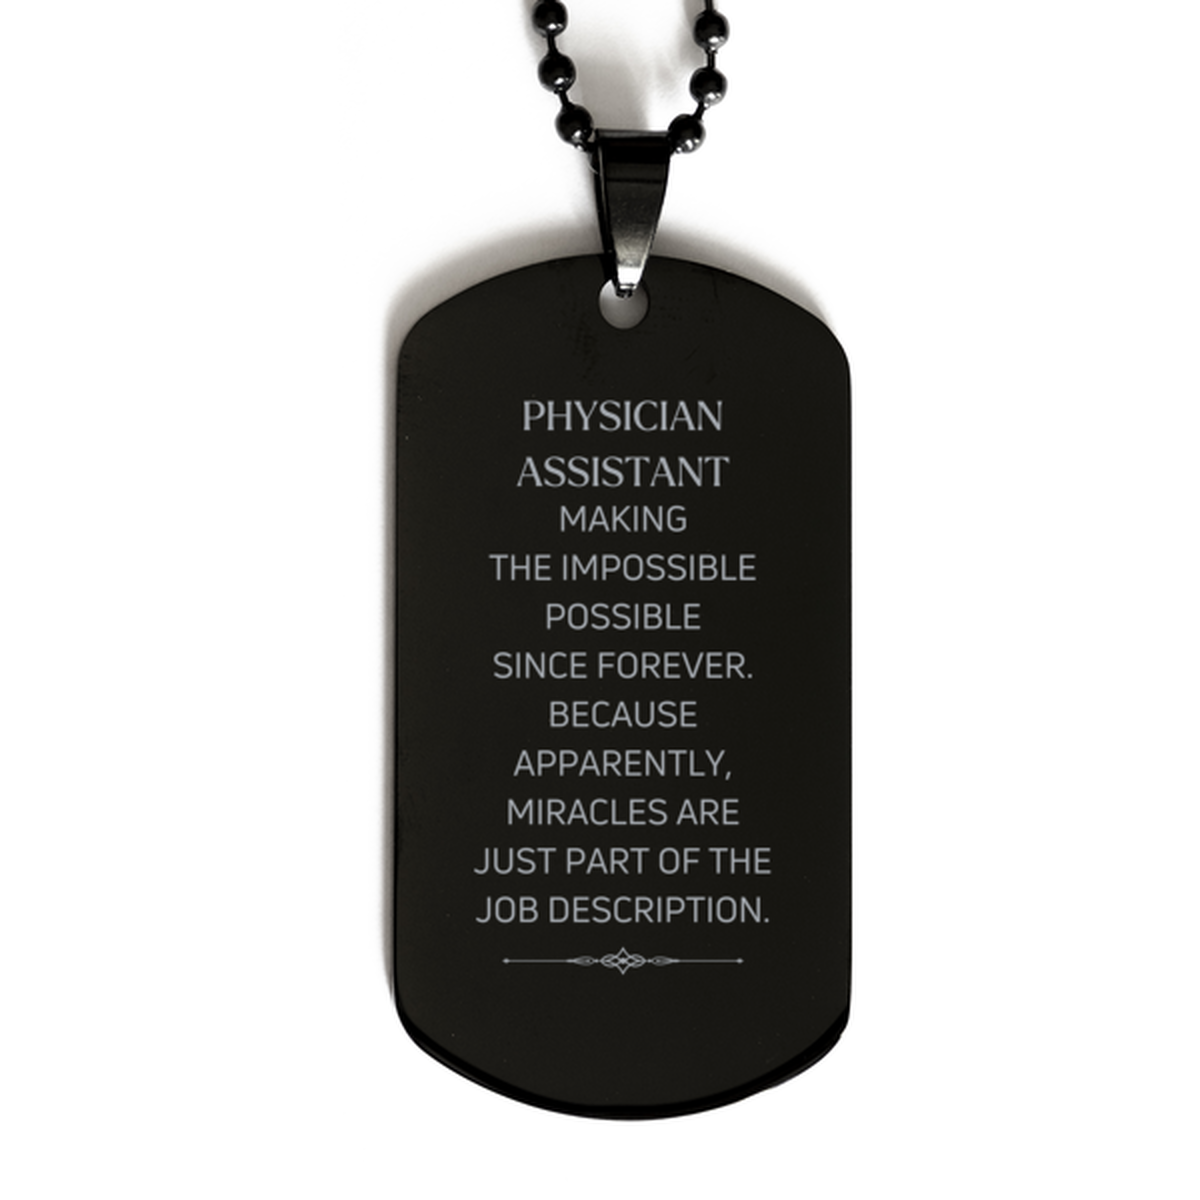 Funny Physician Assistant Gifts, Miracles are just part of the job description, Inspirational Birthday Black Dog Tag For Physician Assistant, Men, Women, Coworkers, Friends, Boss